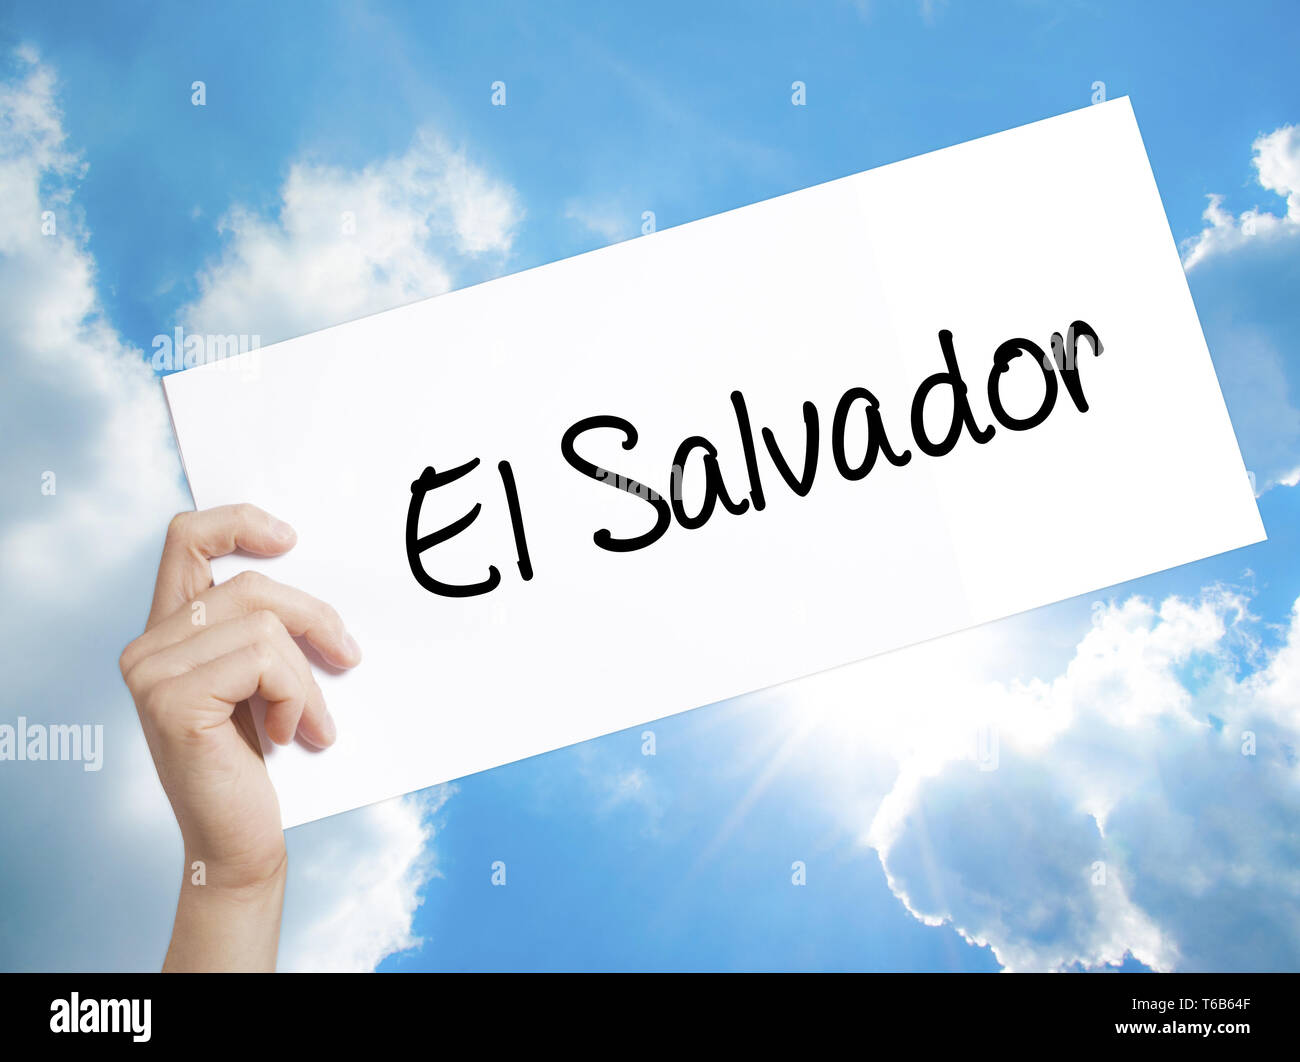 El Salvador Sign on white paper. Man Hand Holding Paper with text. Isolated on sky background Stock Photo